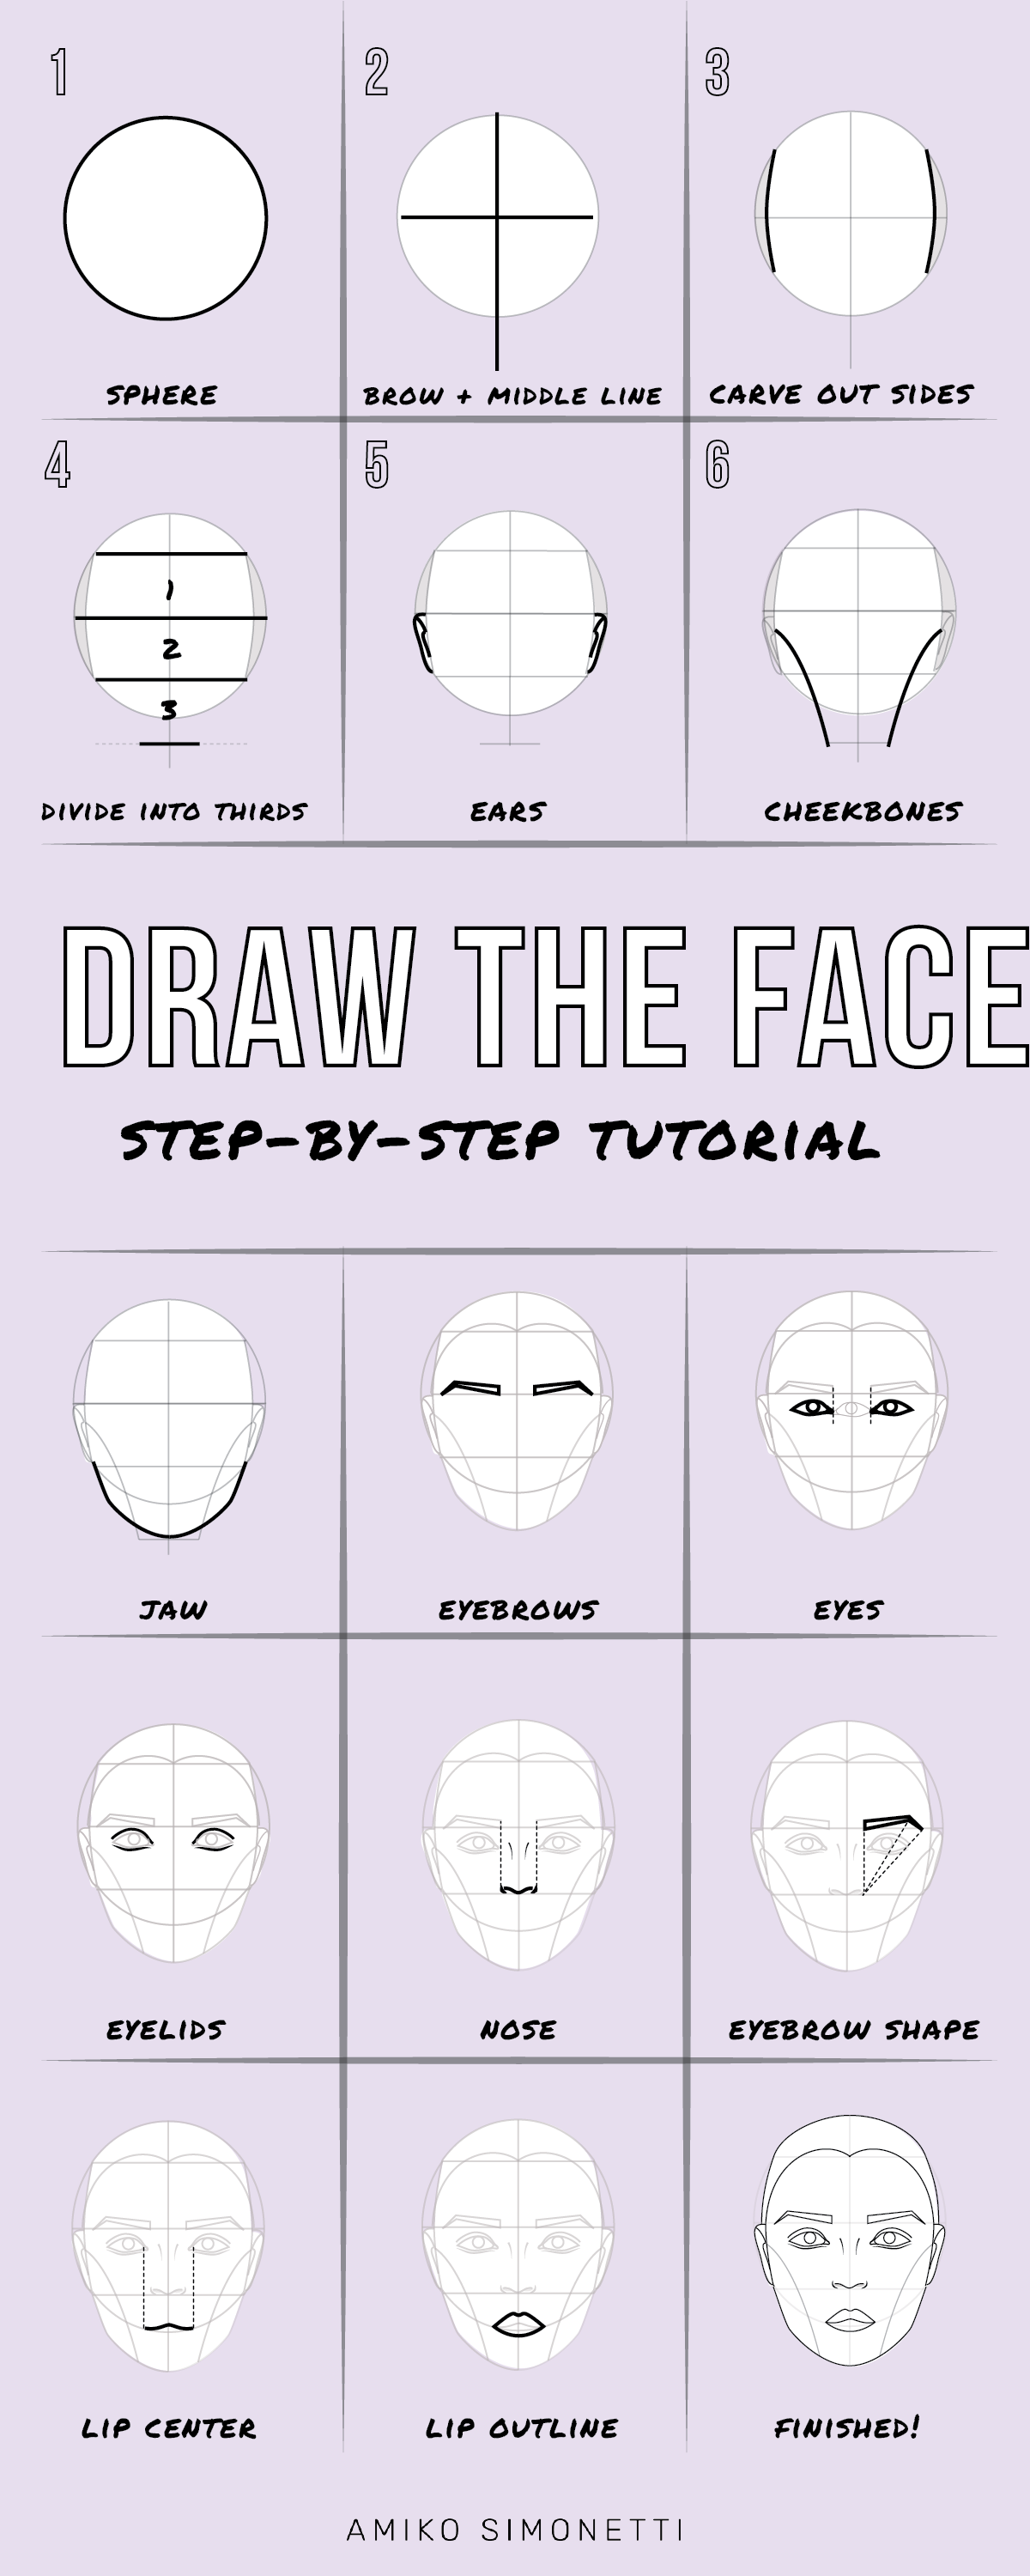 https://images.squarespace-cdn.com/content/v1/54ee5ee6e4b04ae515632afc/1645451503266-3GU1ORB8XS3MHJ3QV207/DRAWING+THE+FACE+INFOGRAPHIC-54-54.png